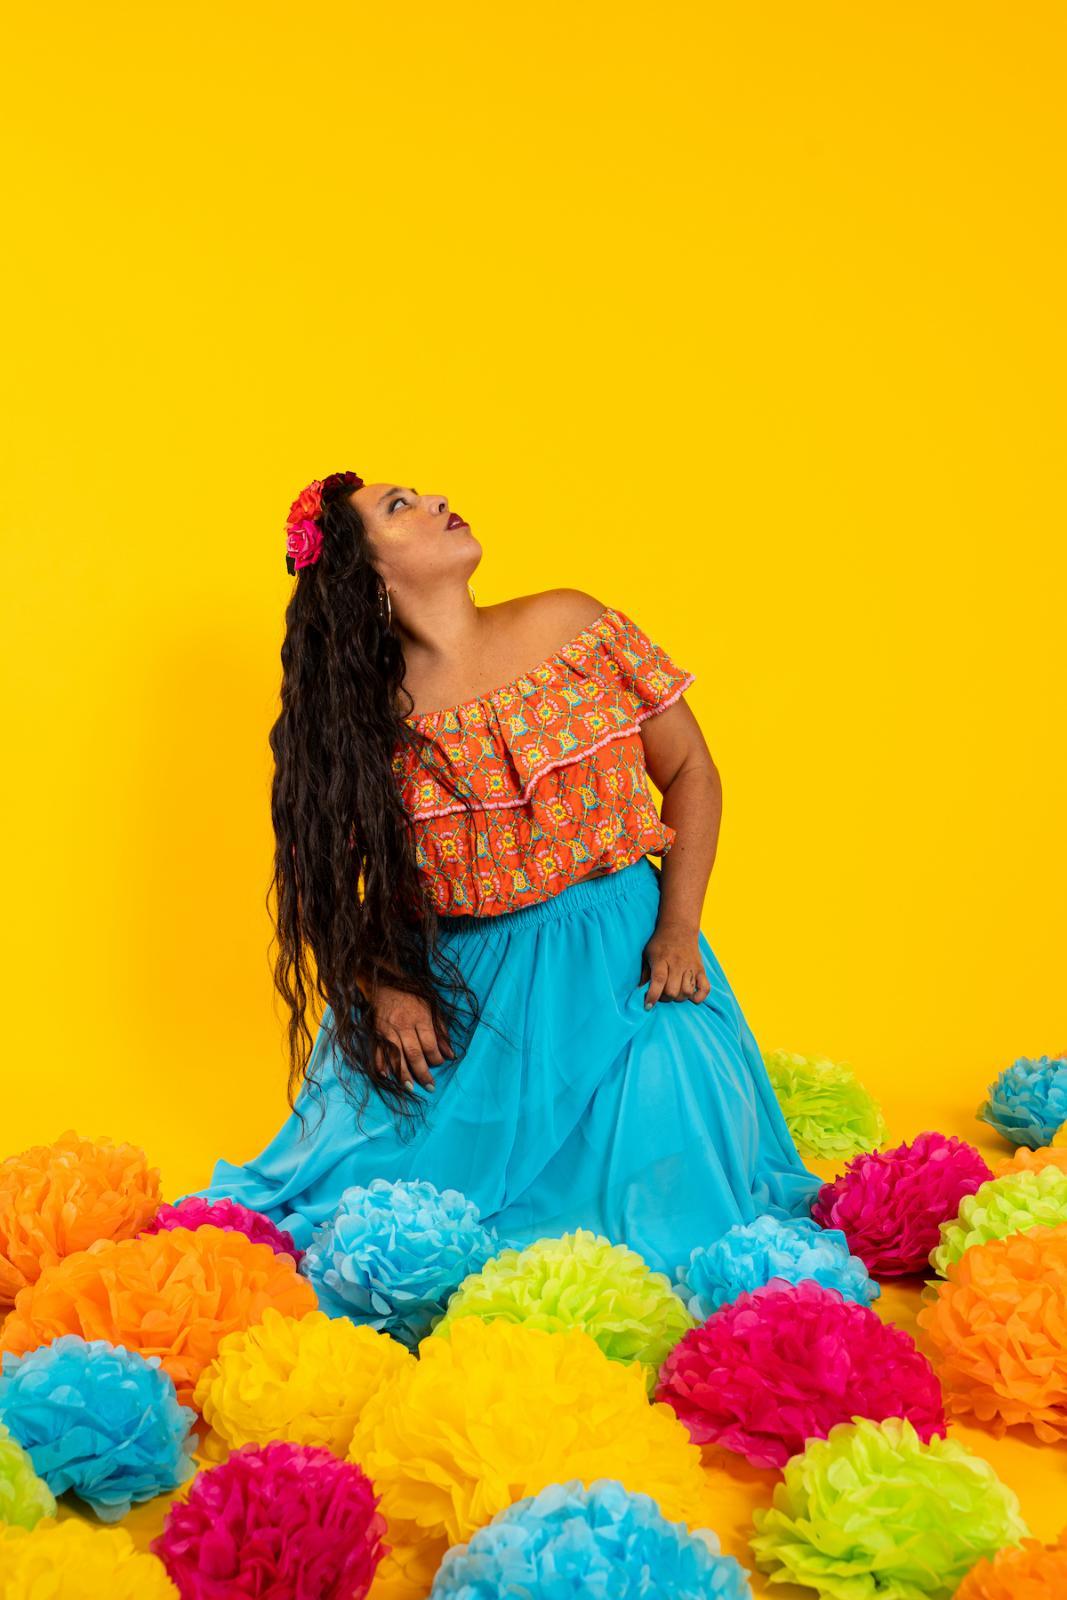 Artist AAlicia Mullikin. She is against a yellow backdrop and surrounded by yellow, green, teal, and bright pink poms on the floor. She has long wavy hair spilling down the side of her shoulder and body and holding a teal dress, looking up to the right. Her top is a print containing the colors of the floor poms and is off the shoulders with ruffles across the top.